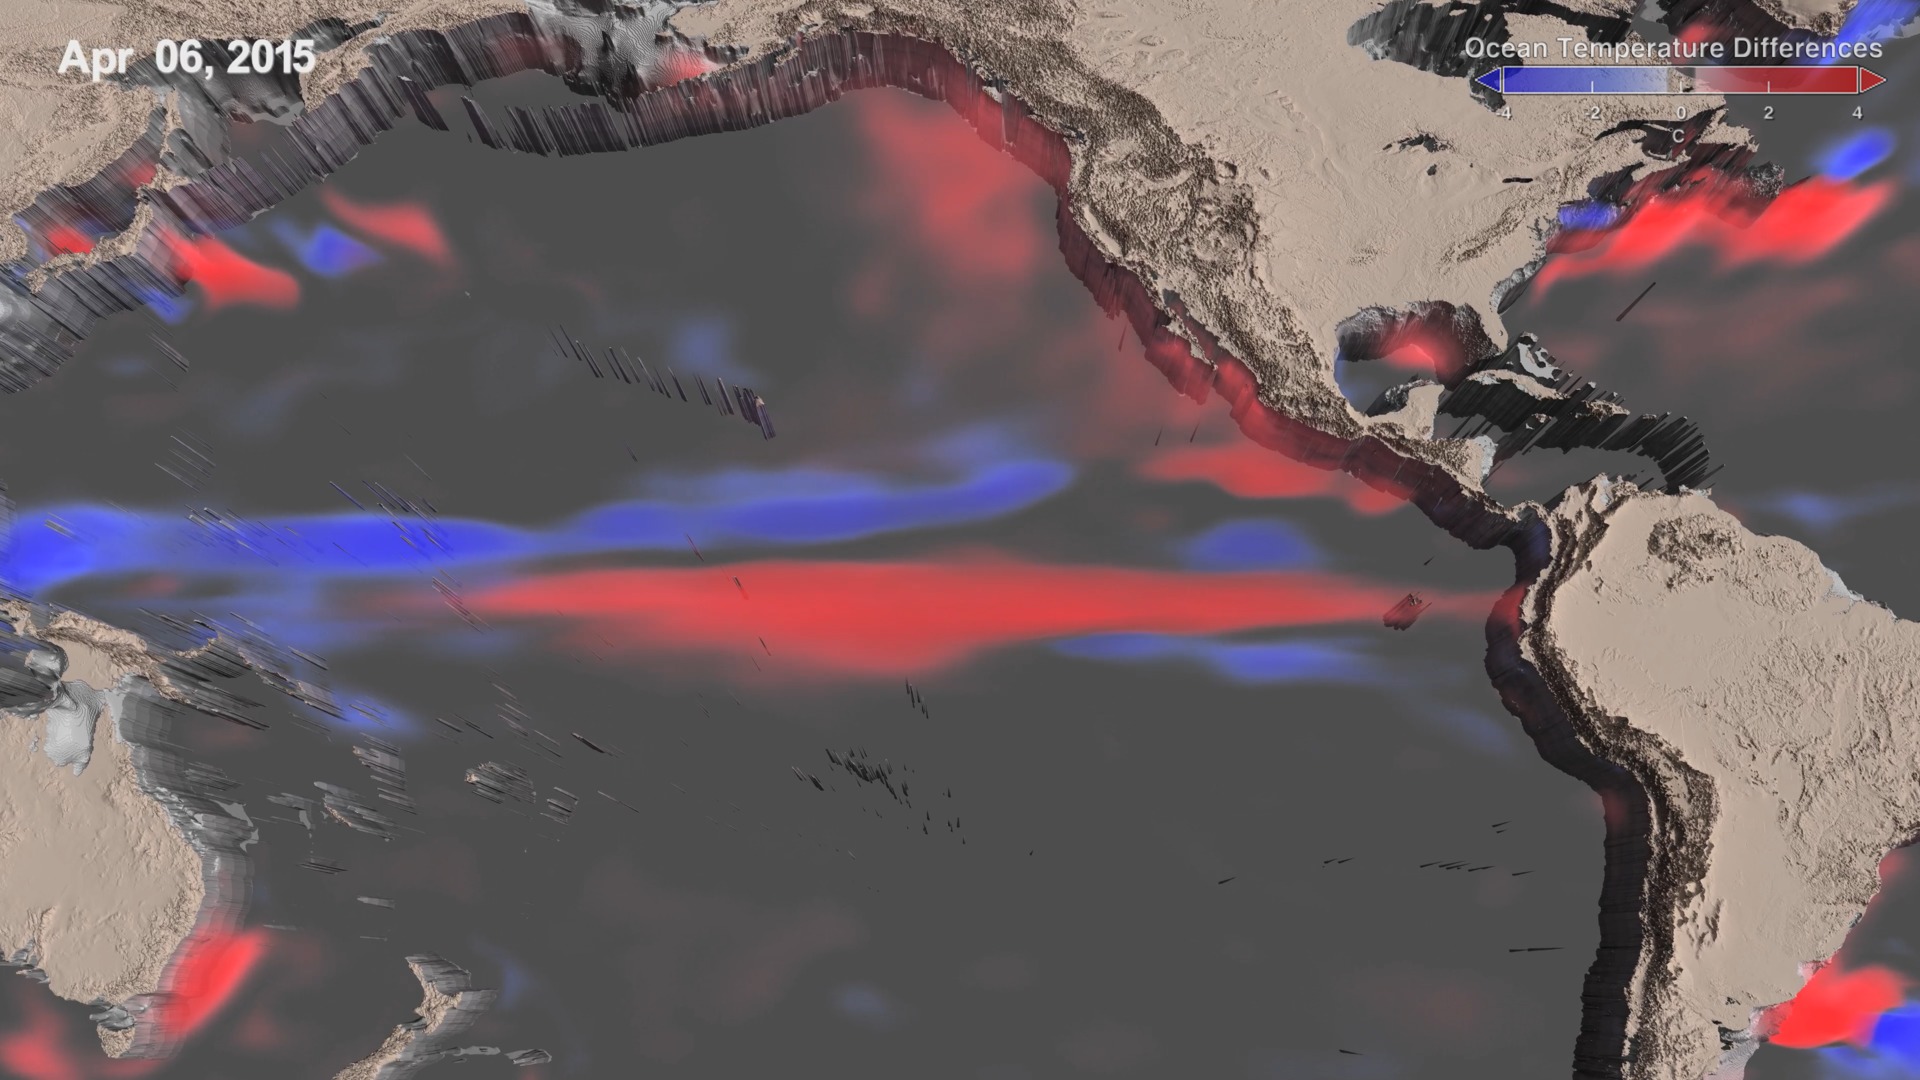 Follow changes in sea surface temperature and ocean currents during El Niño.